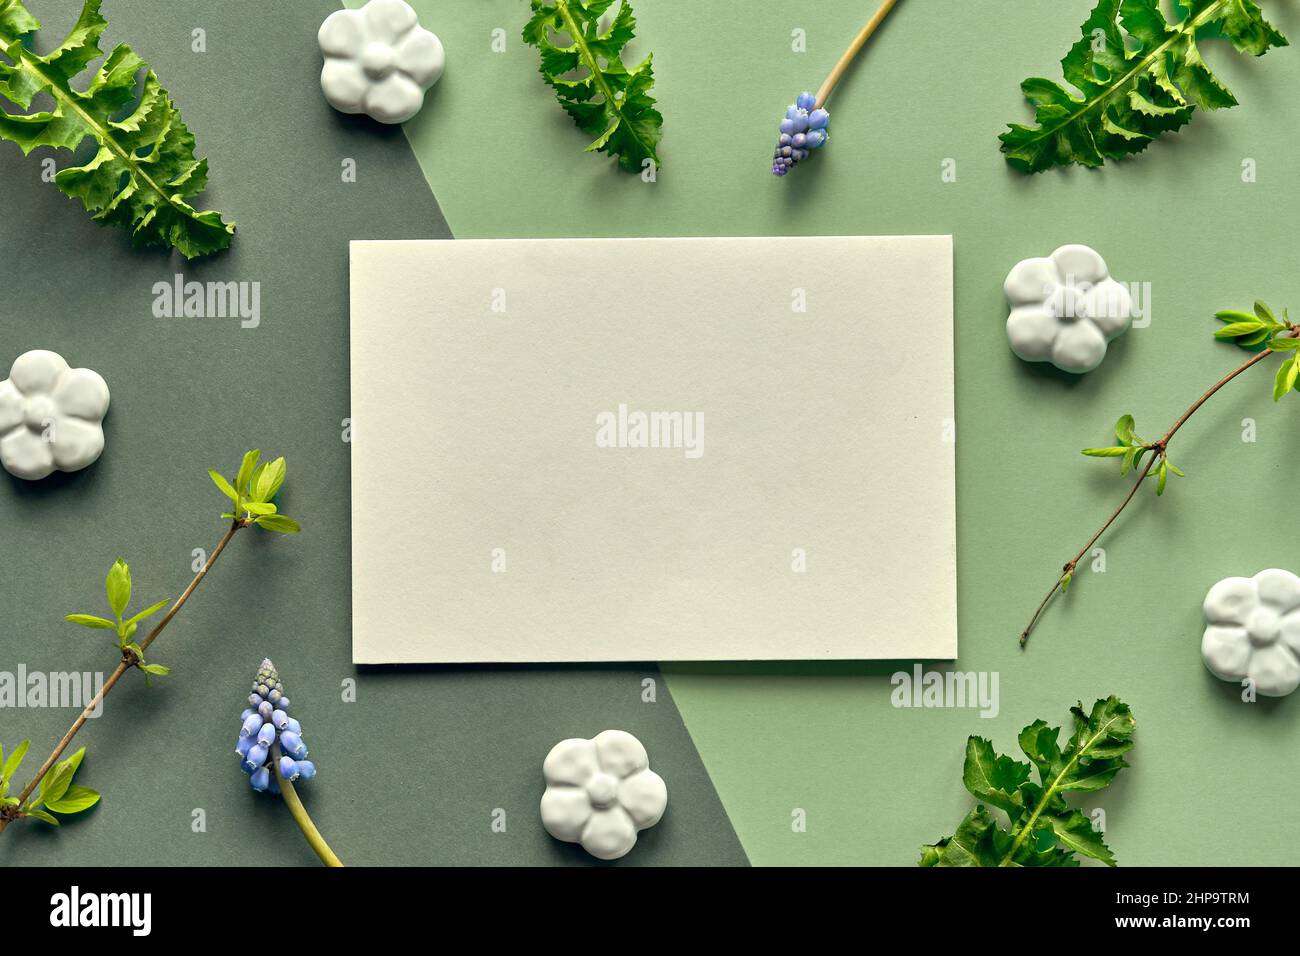 Spring background with natural leaves, flowers around blank paper card. Blue grape hyacinth on paper Stock Photo